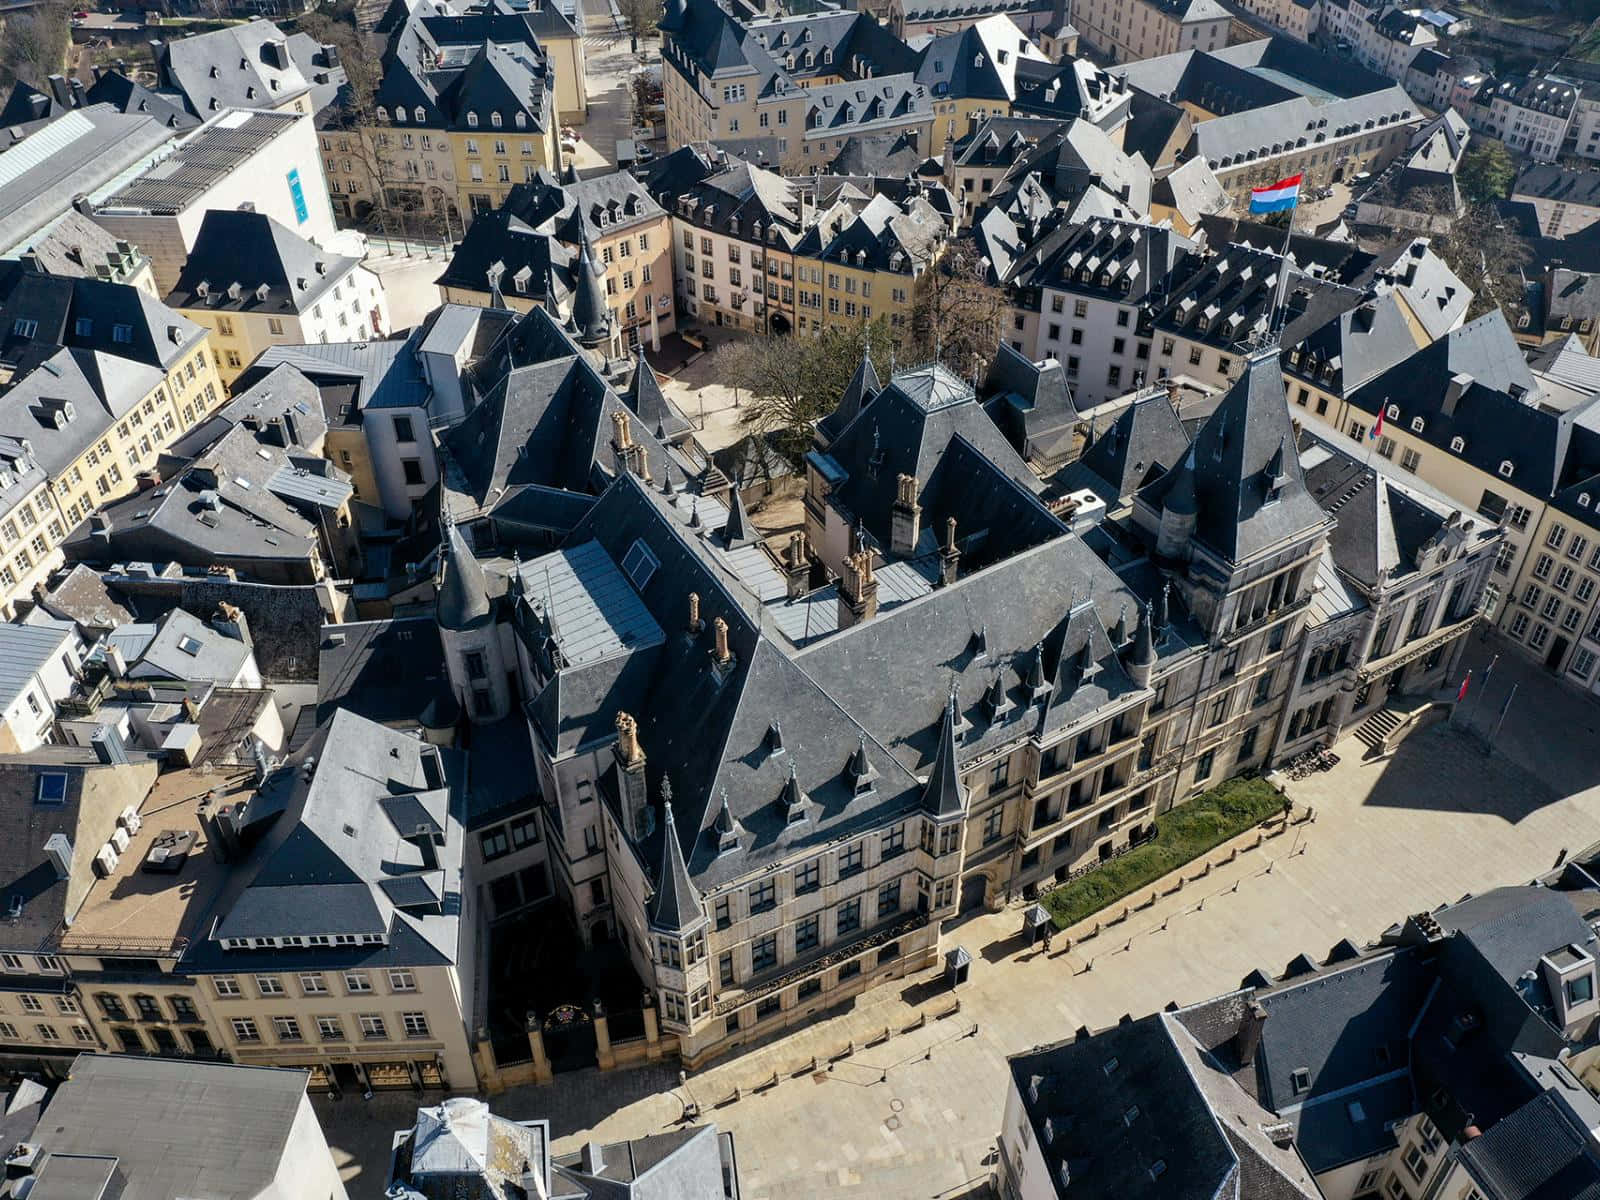 Caption: Majestic Grand Ducal Palace In Luxembourg Wallpaper